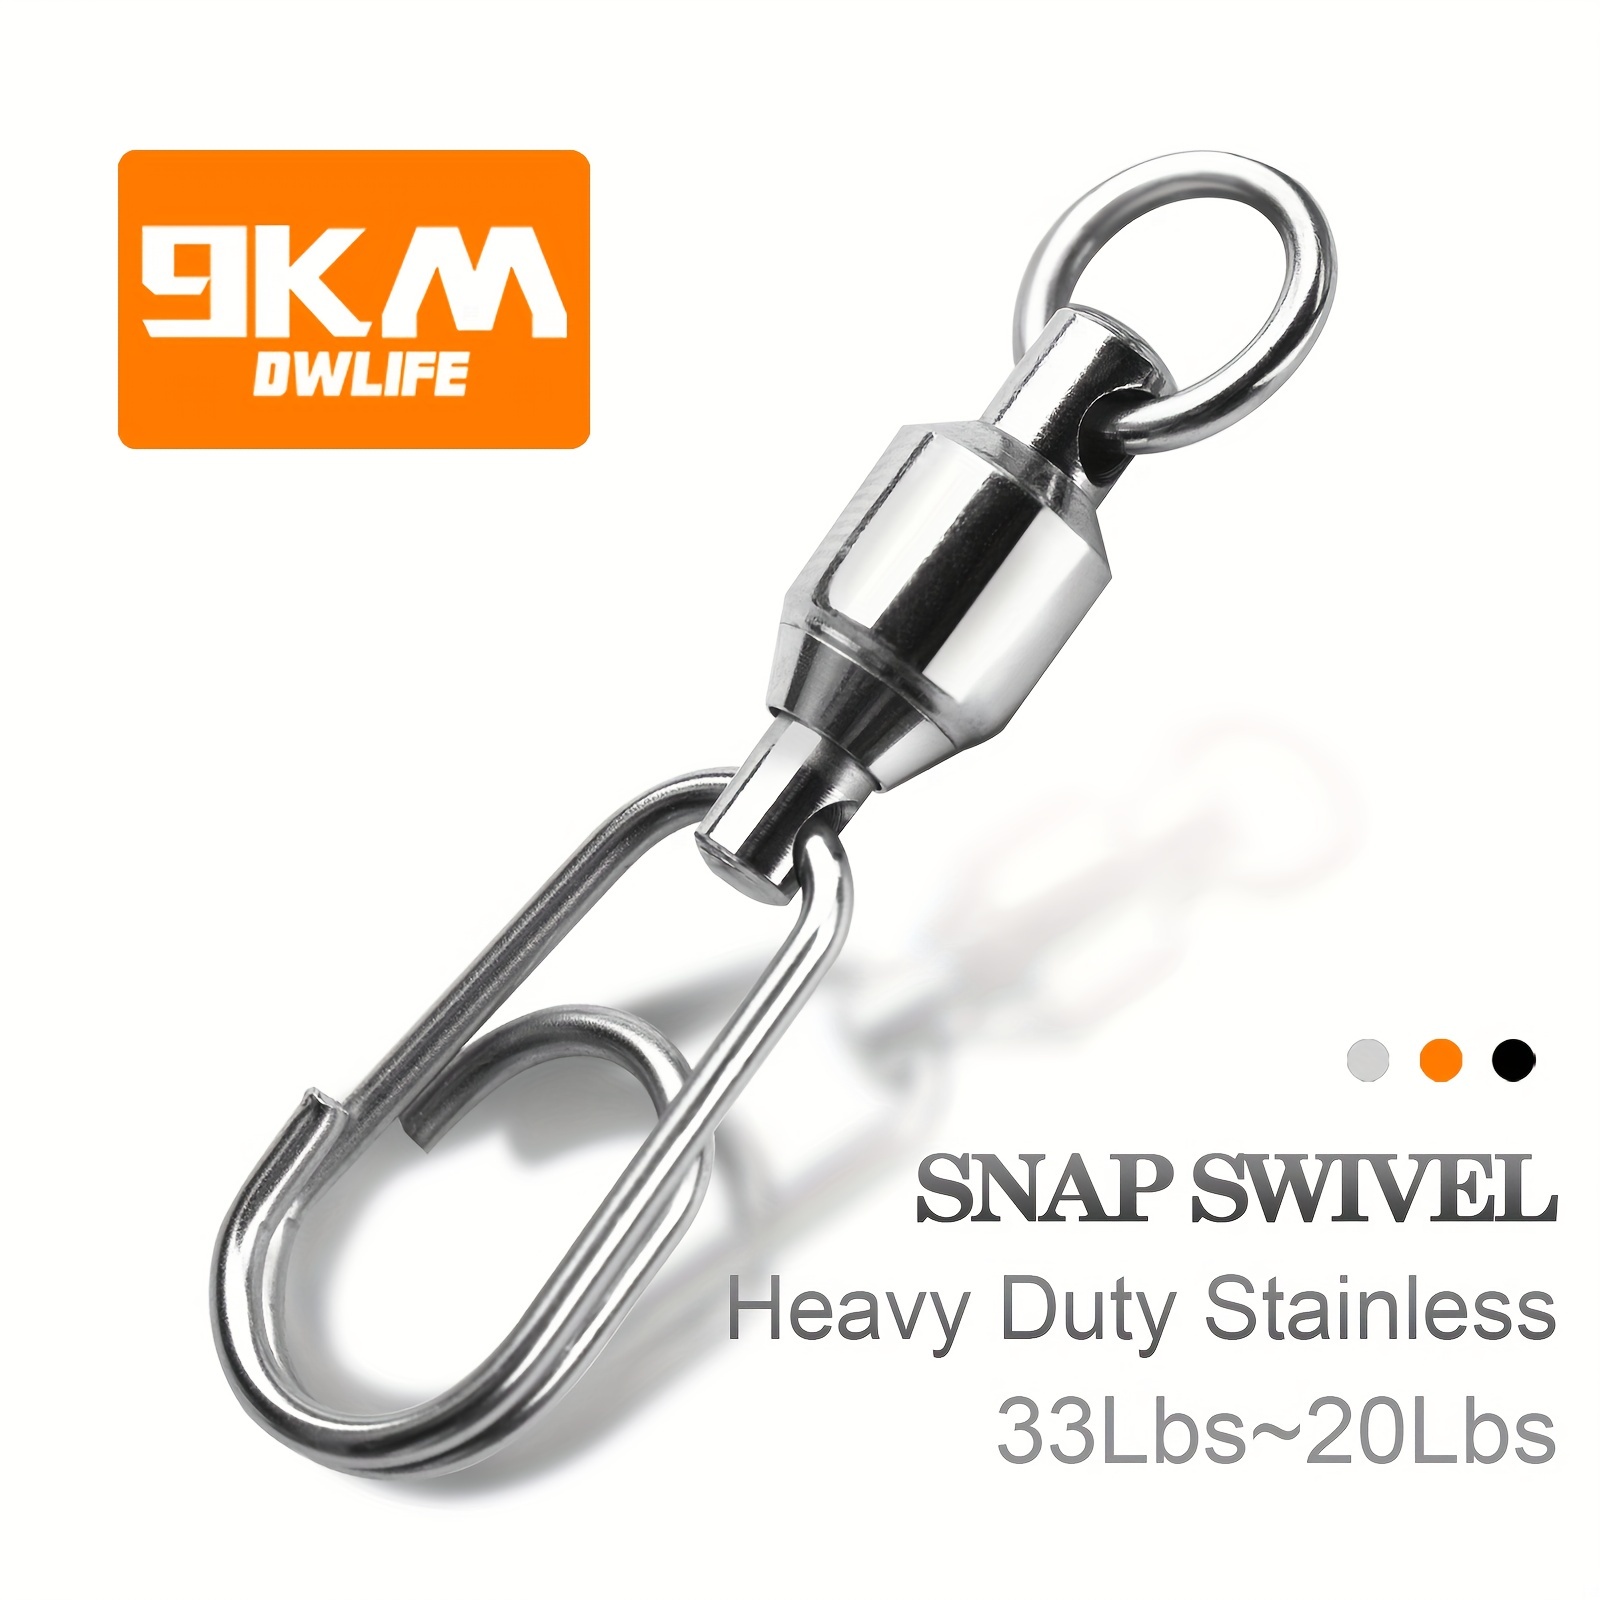 Durable Stainless Steel Fishing Snap Swivels with Fast Snaps and Rolling  Ball Bearings - Ideal for Saltwater and Freshwater Fishing, Line Connector  an